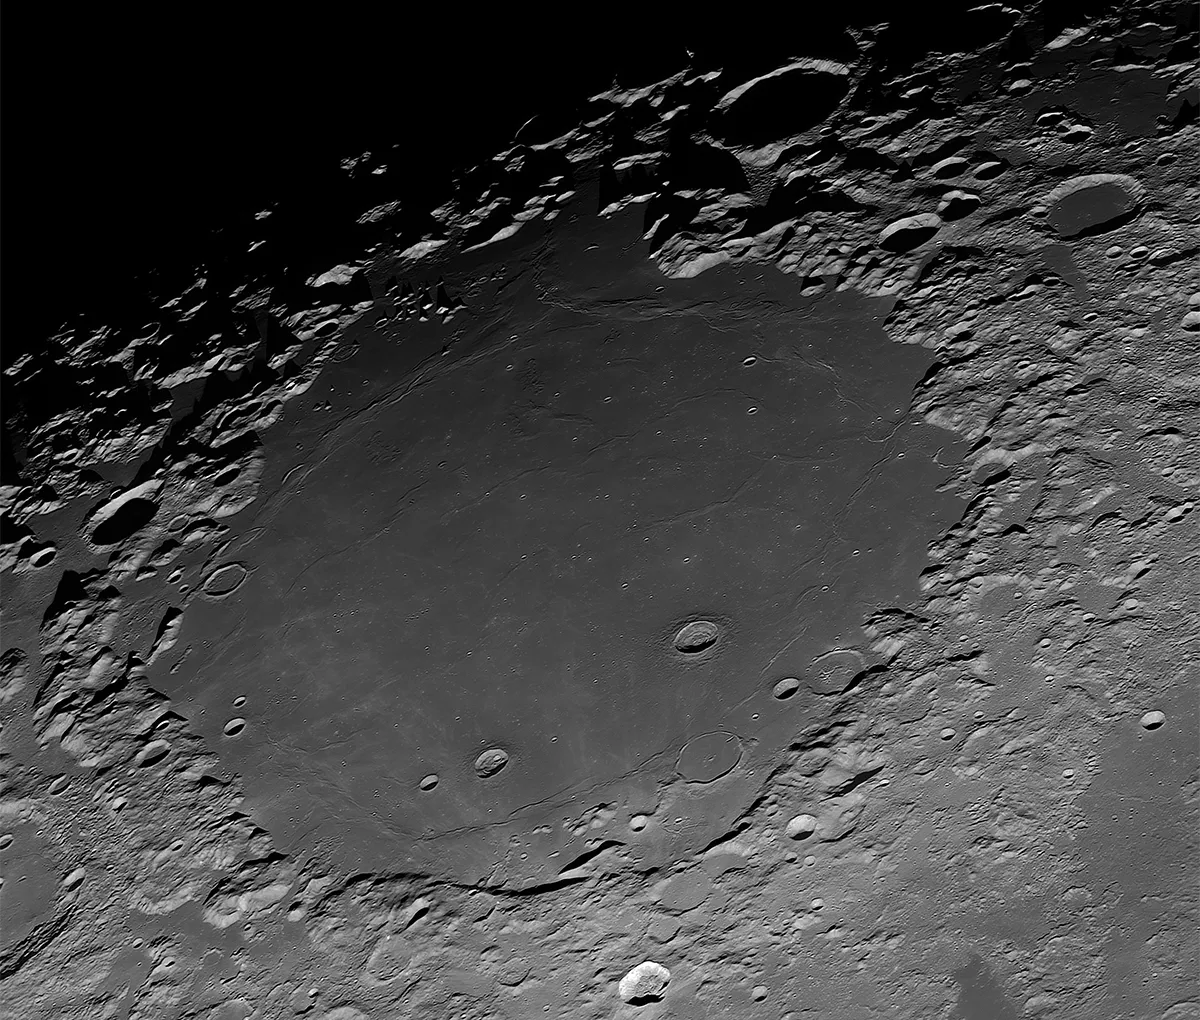 Moon crater